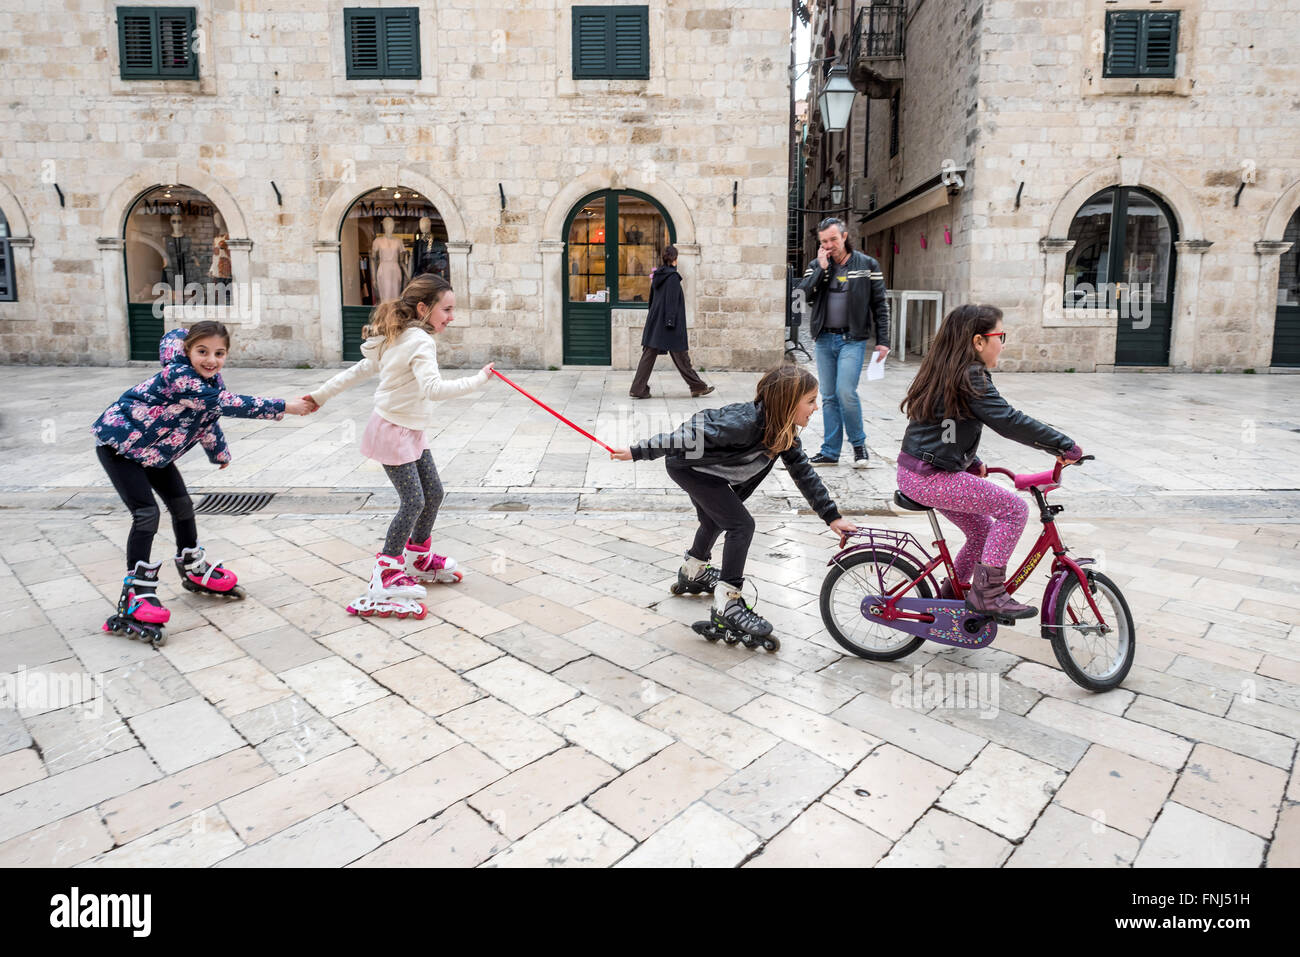 Children playing on the street in the old city of Dubrovnik, Croatia. Stock Photo